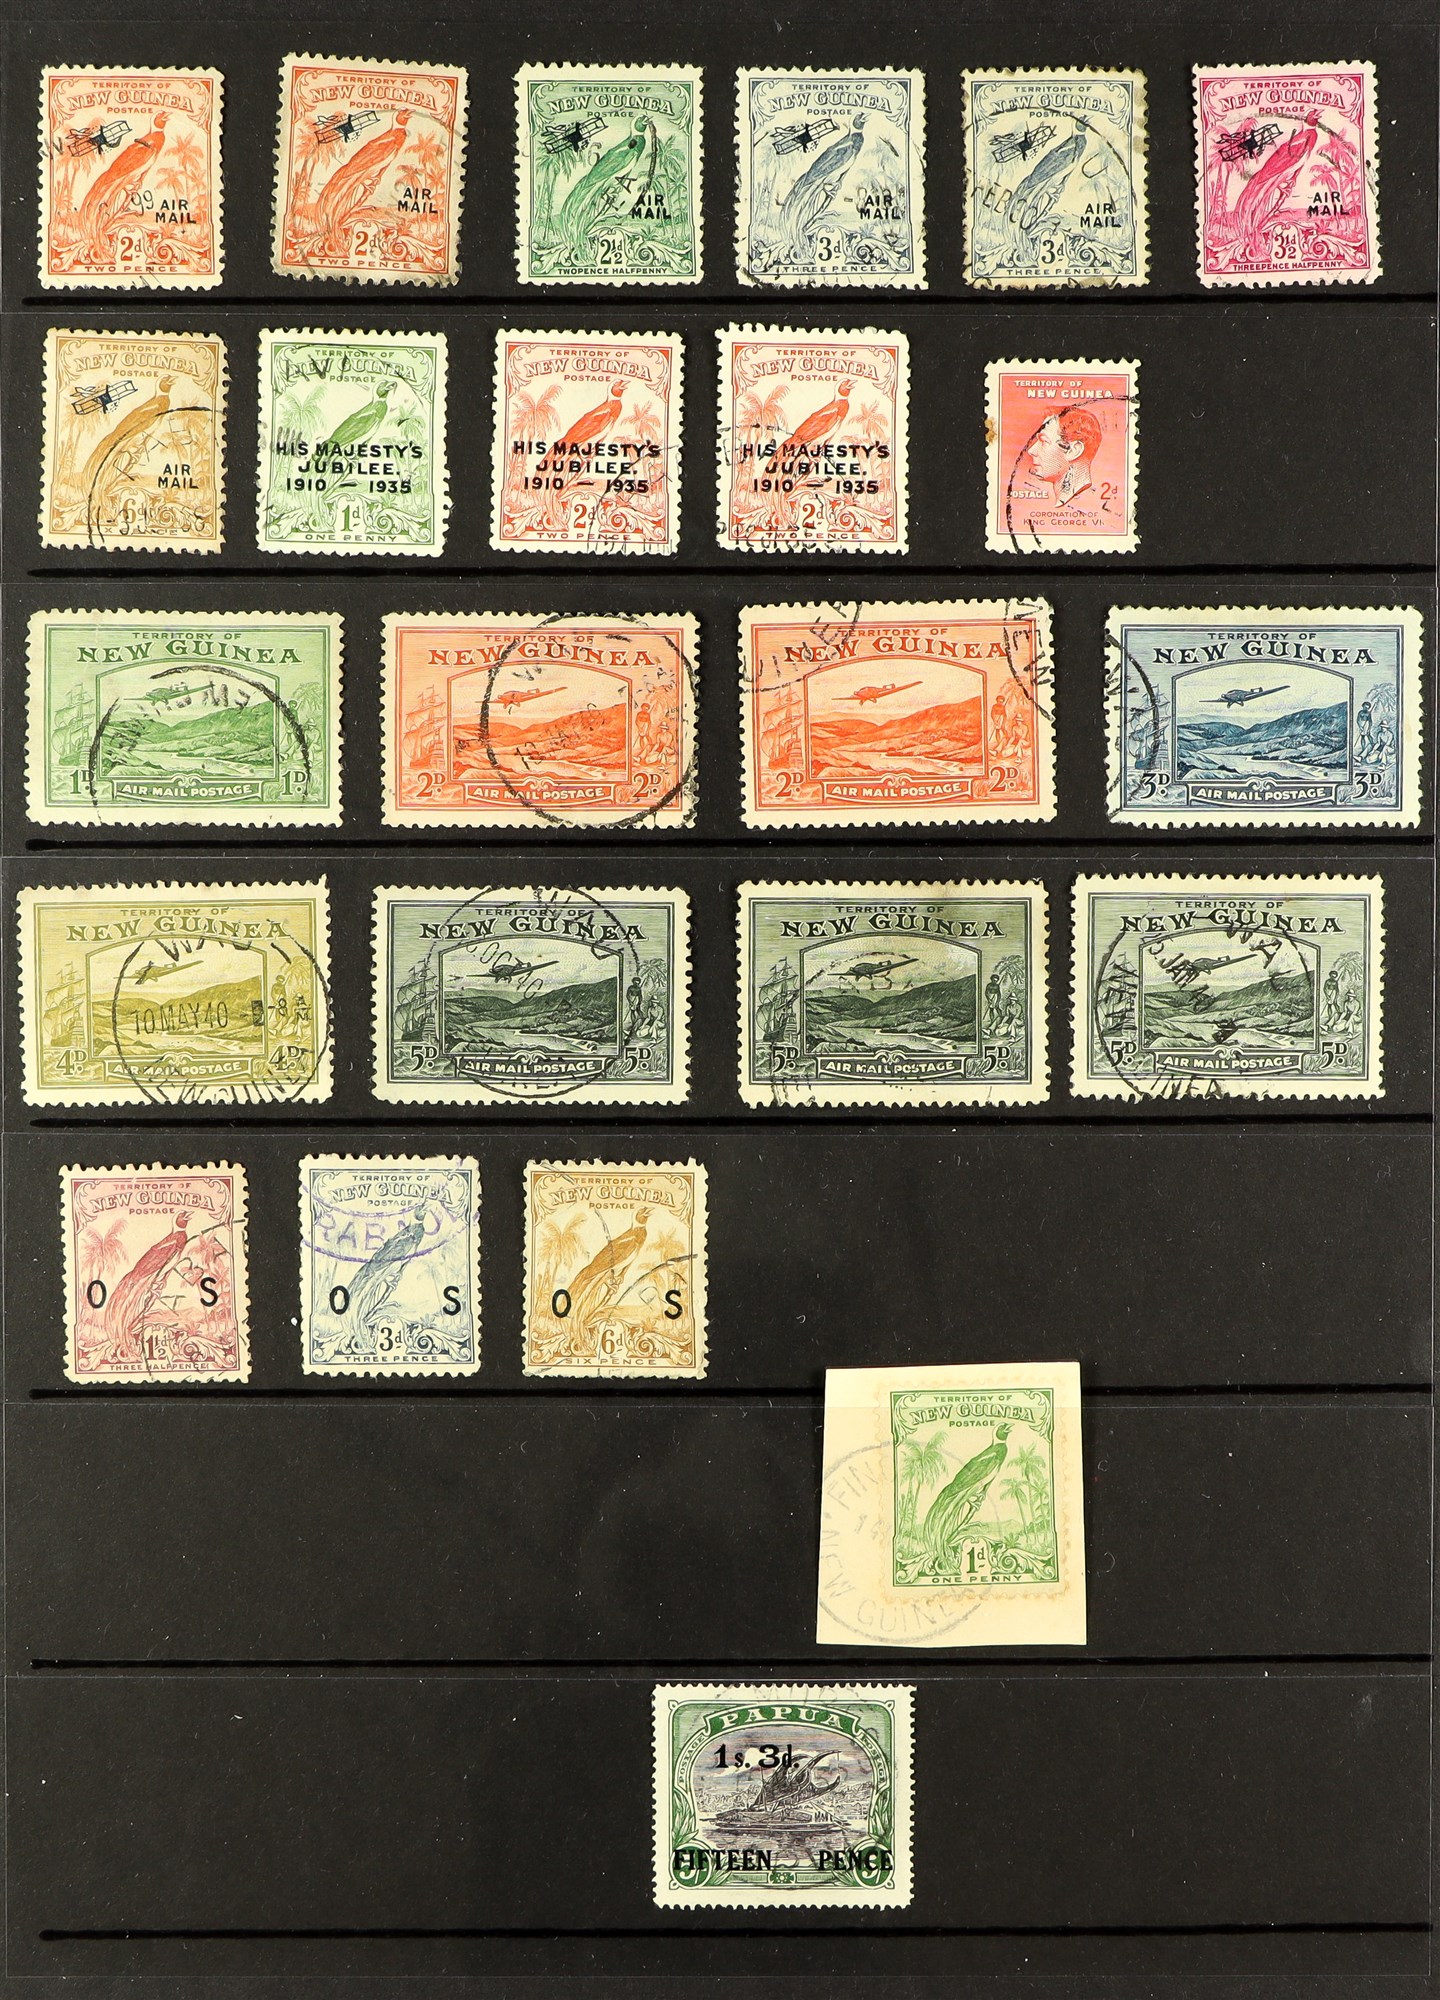 NEW GUINEA 1915 - 1939 SPECIALISED ASSORTMENT of 100+ used stamps on various pages collected for - Image 10 of 10